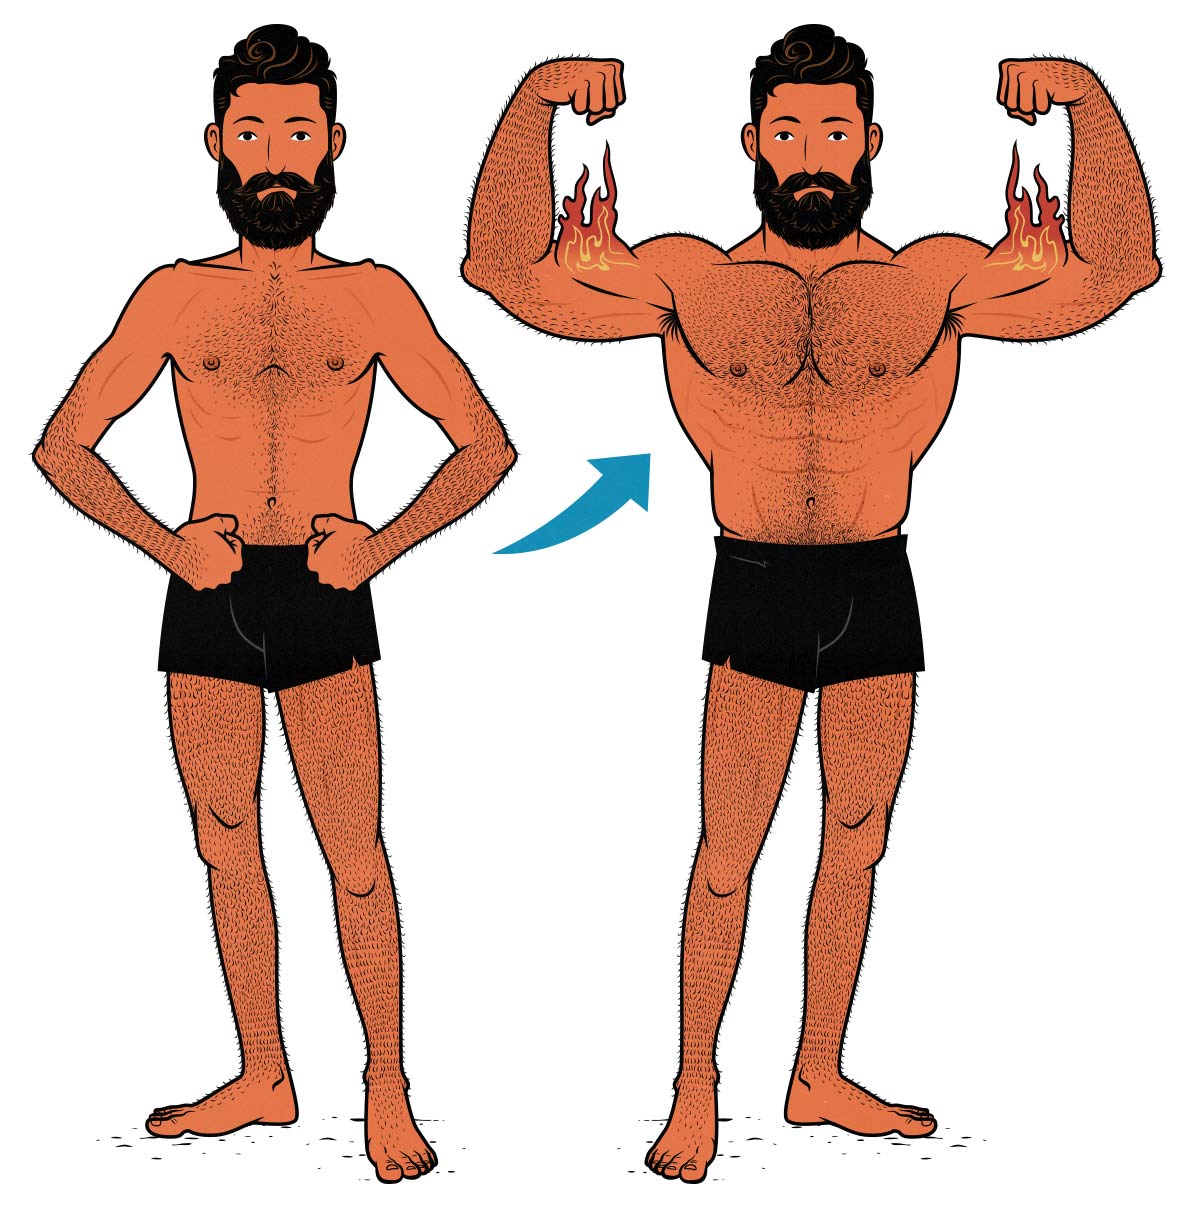 Illustration of a bodybuilder with a big, muscular upper body and small legs from skipping leg day.